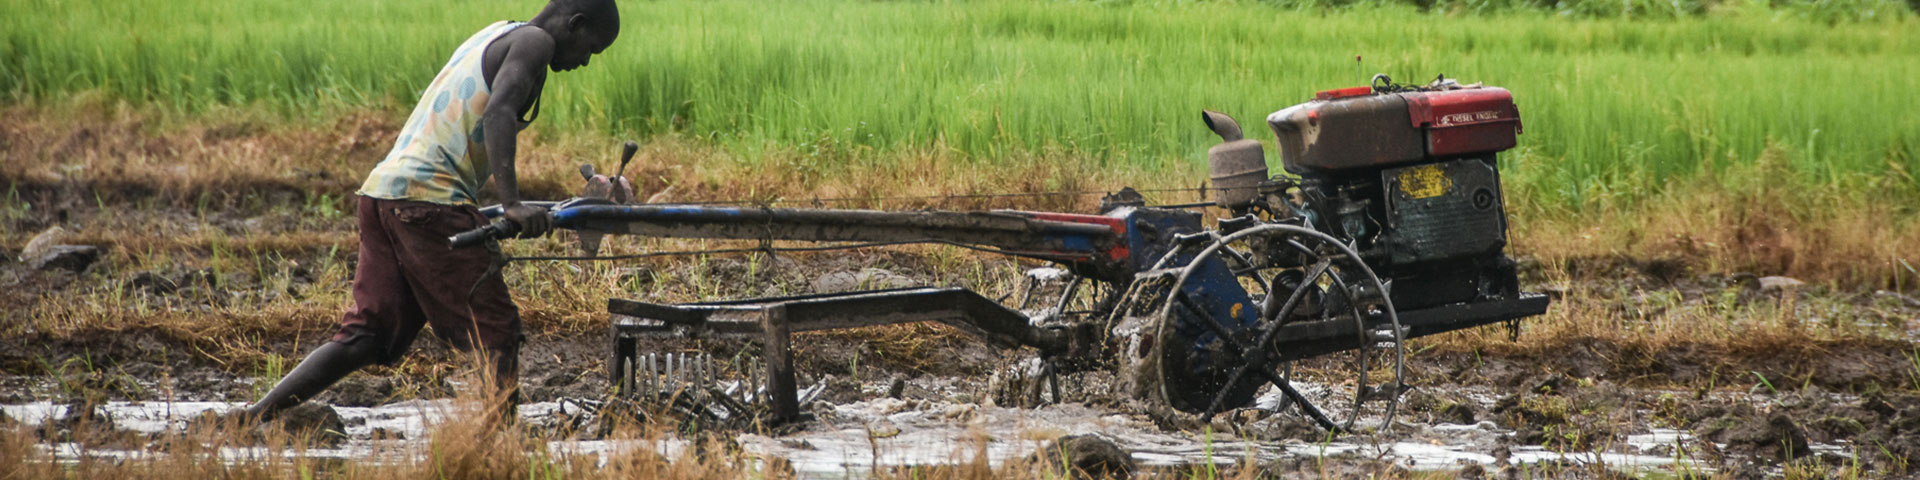 Rice farmer working with a manual tractor